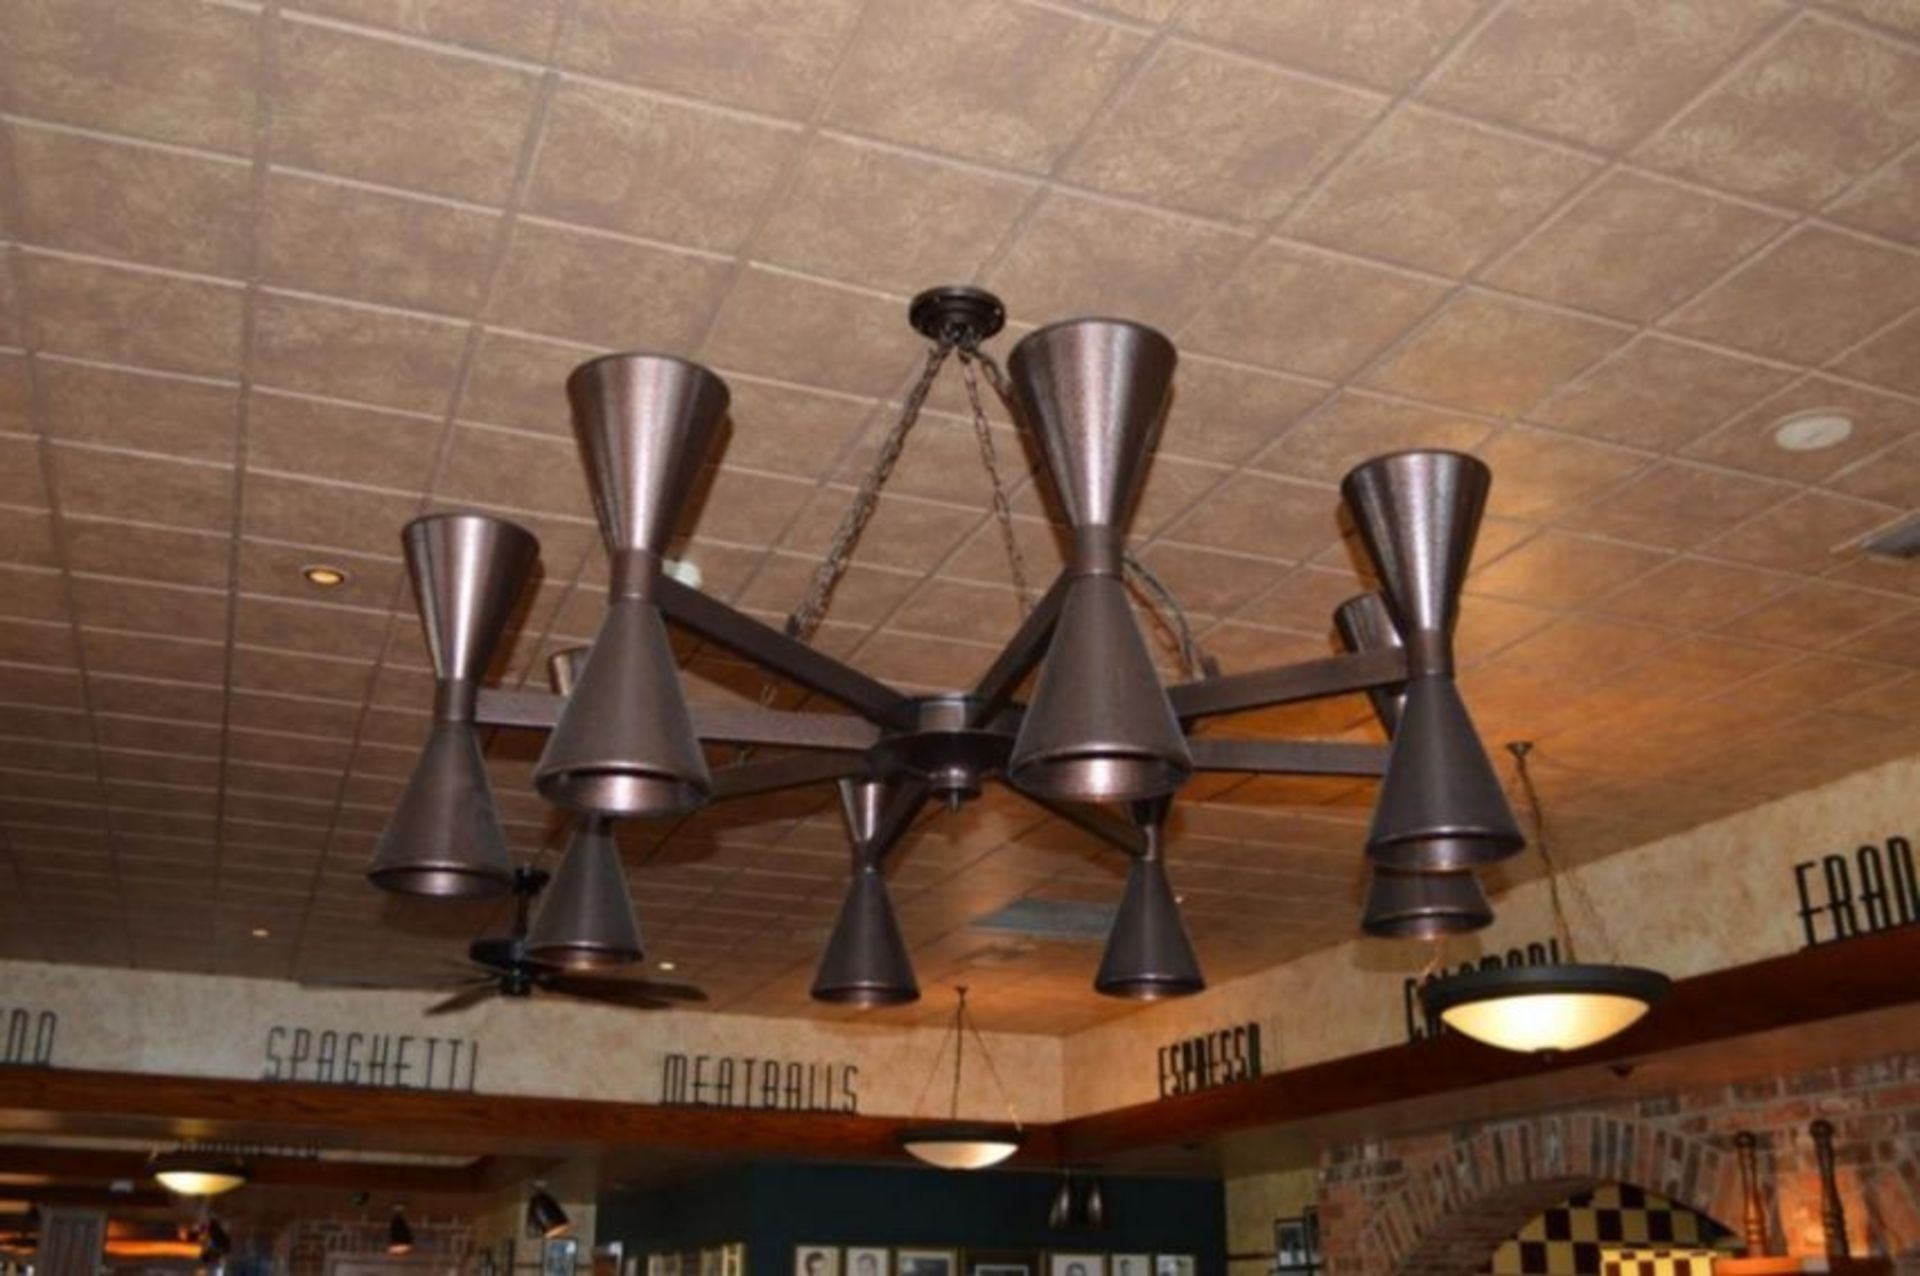 1 x Large and Impressive 8 Arm Chandelier Light Fitting With Brown Pitted Finish - Image 2 of 8